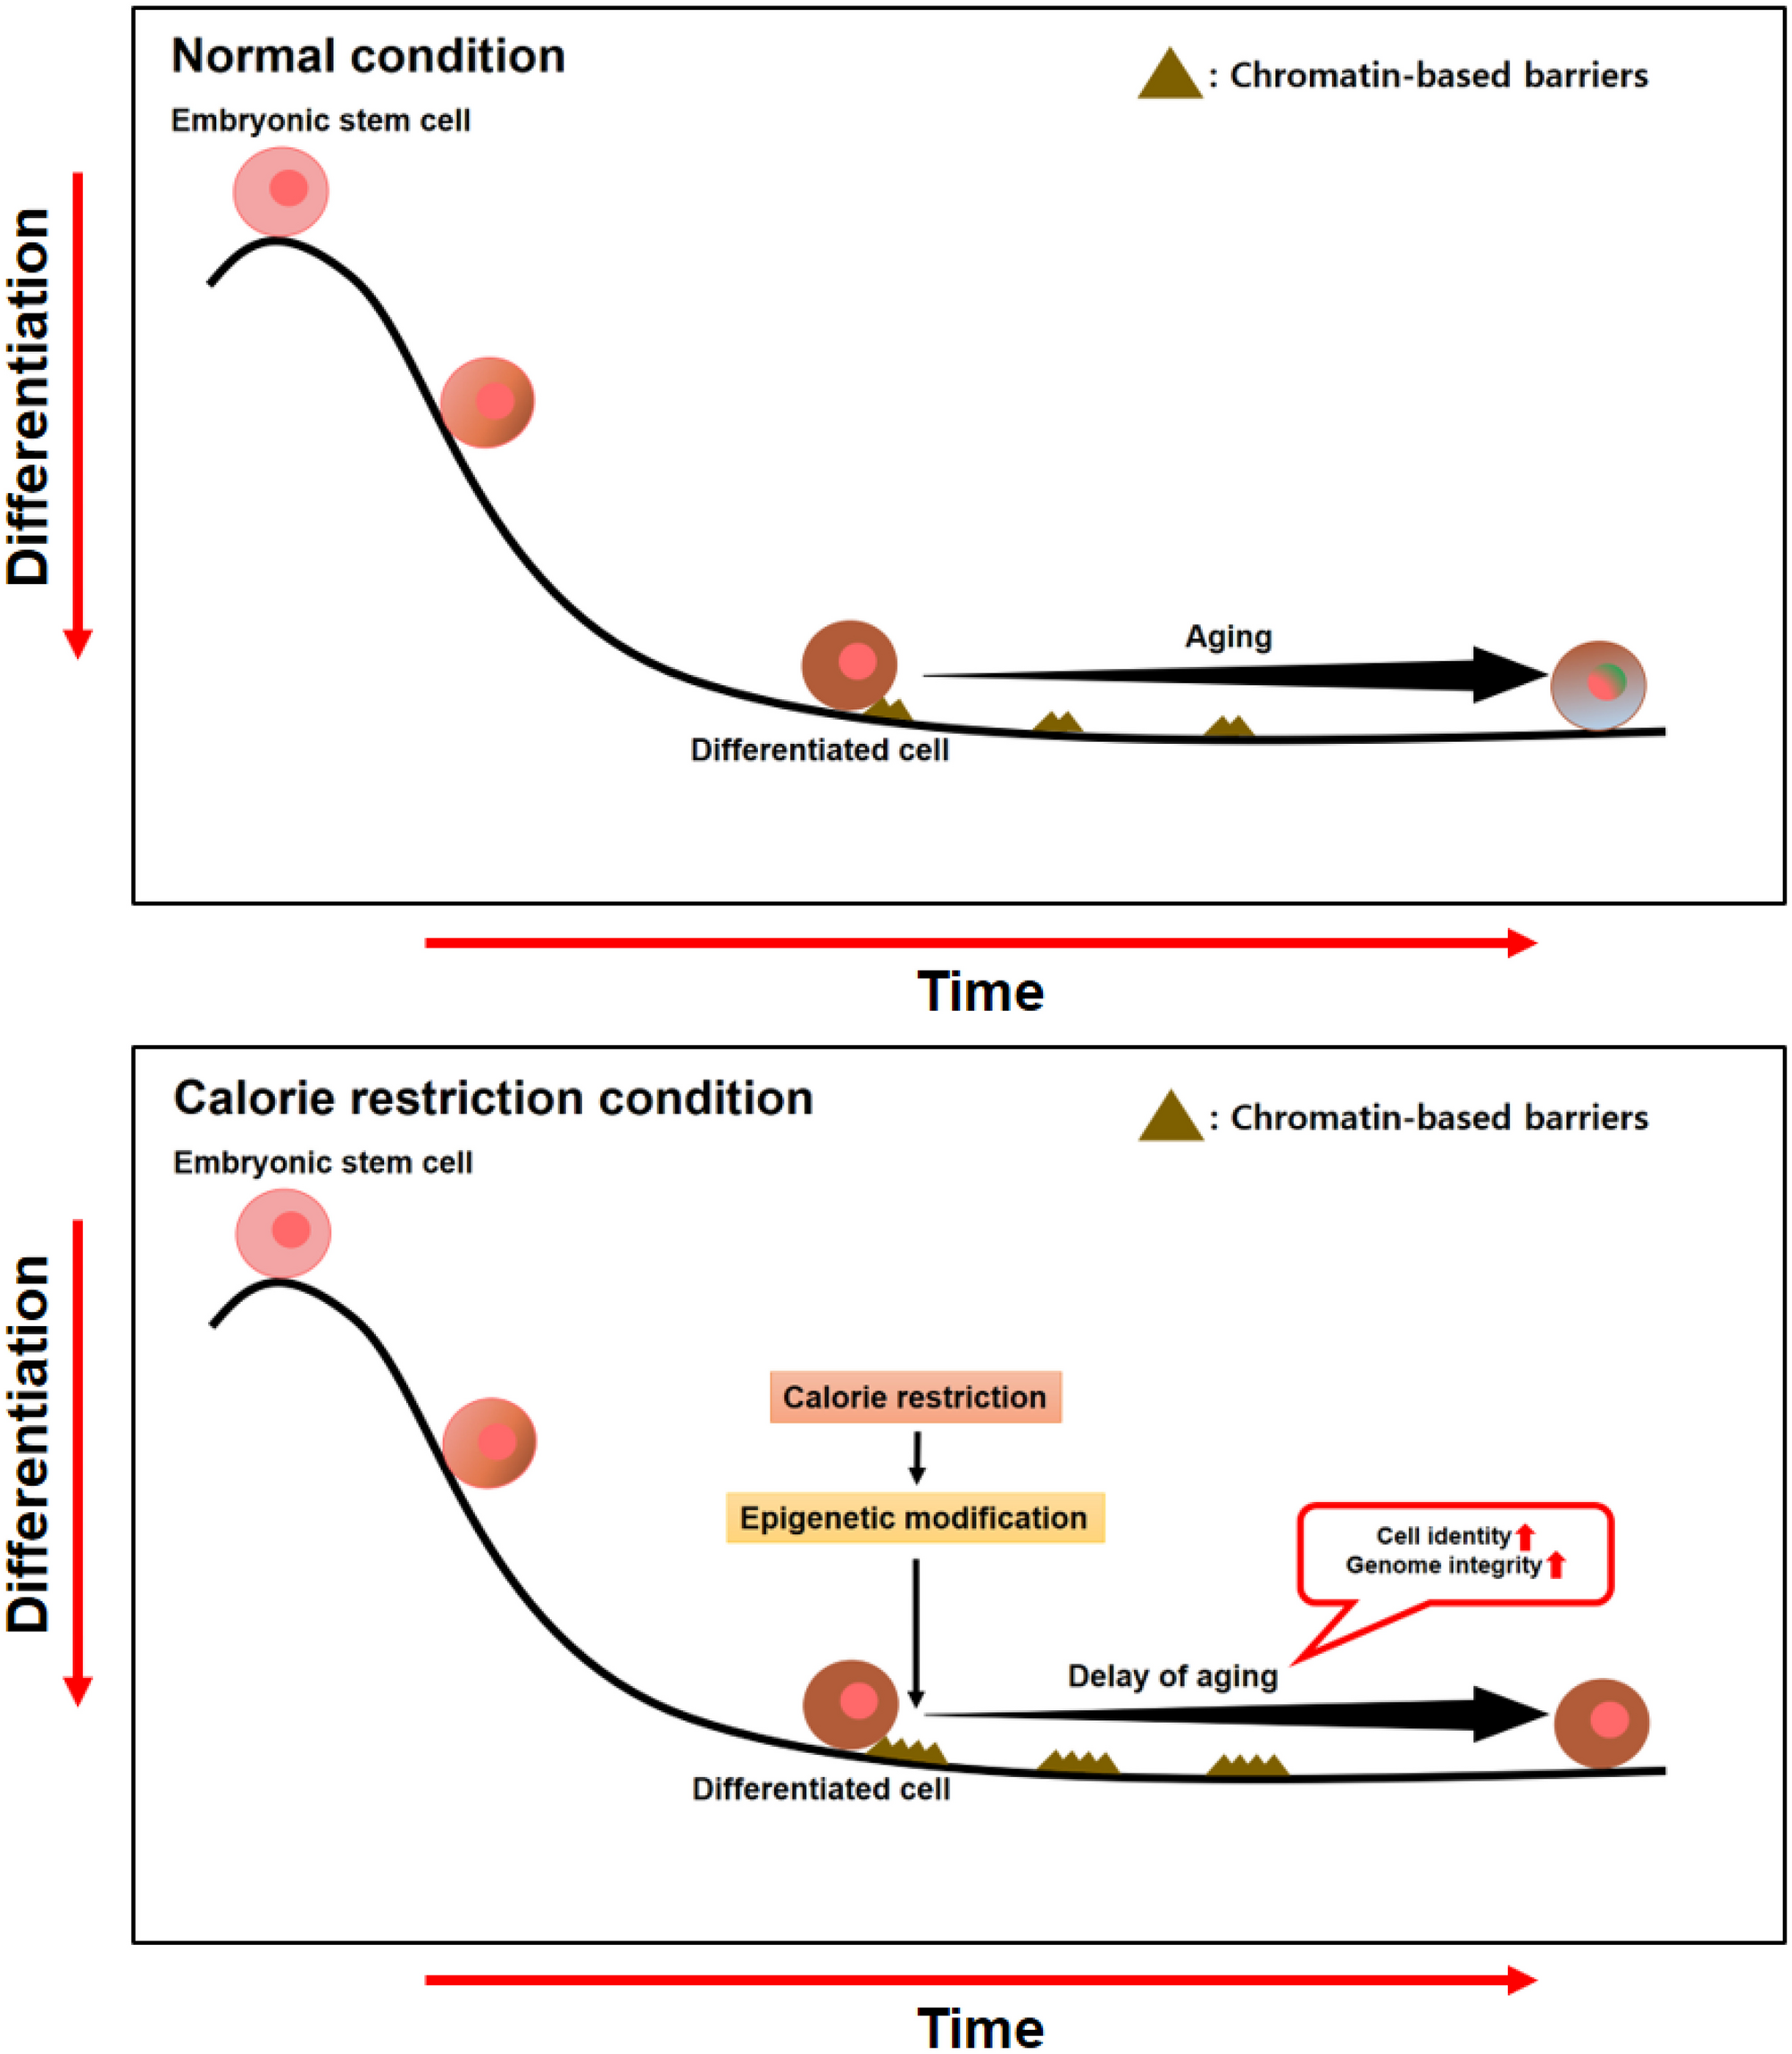 How calorie restriction slows aging: an epigenetic perspective